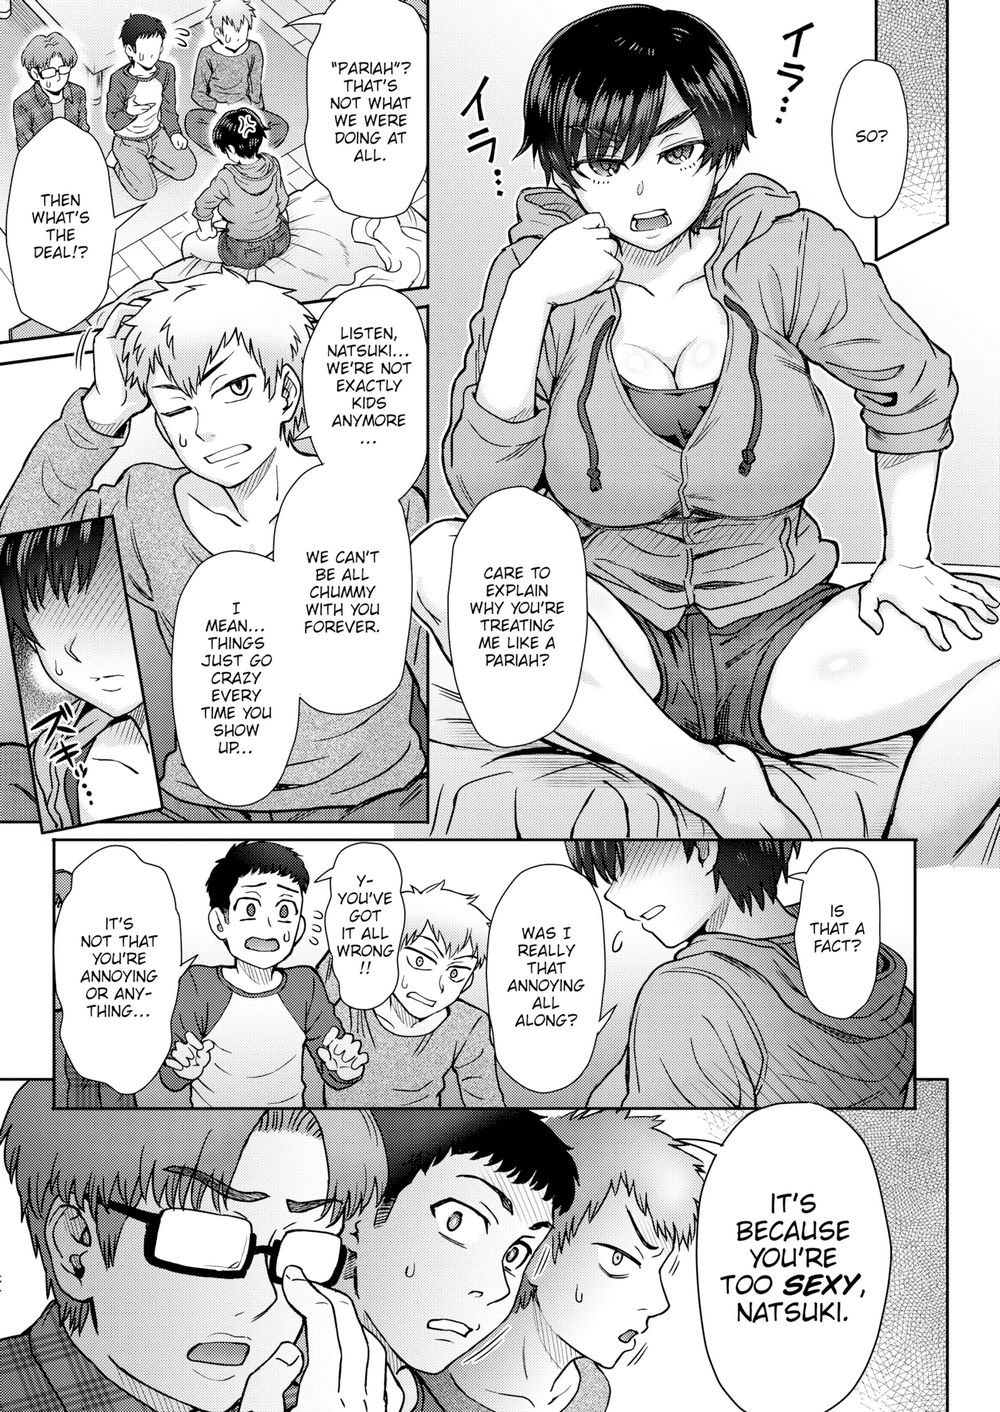 Sex Best Friends - Busty tomboy gets gangabanged by her friends - uncensored manga hentai picture